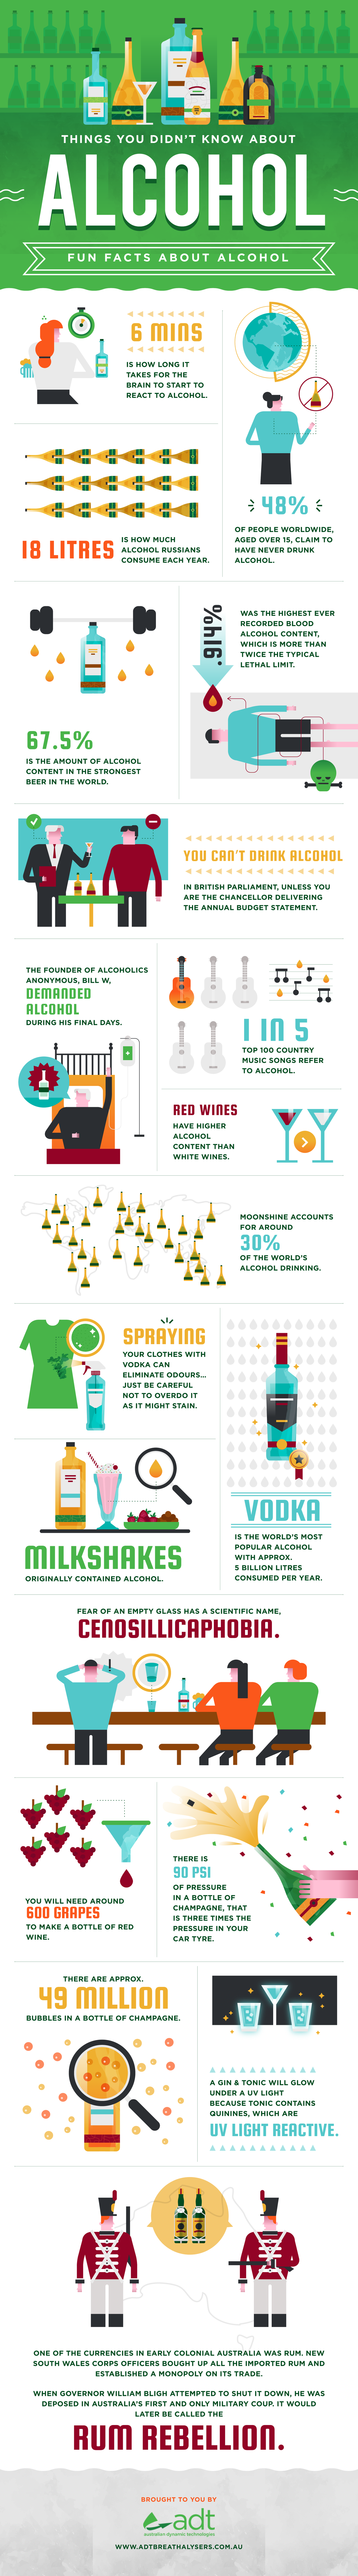 Fun facts about Alcohol